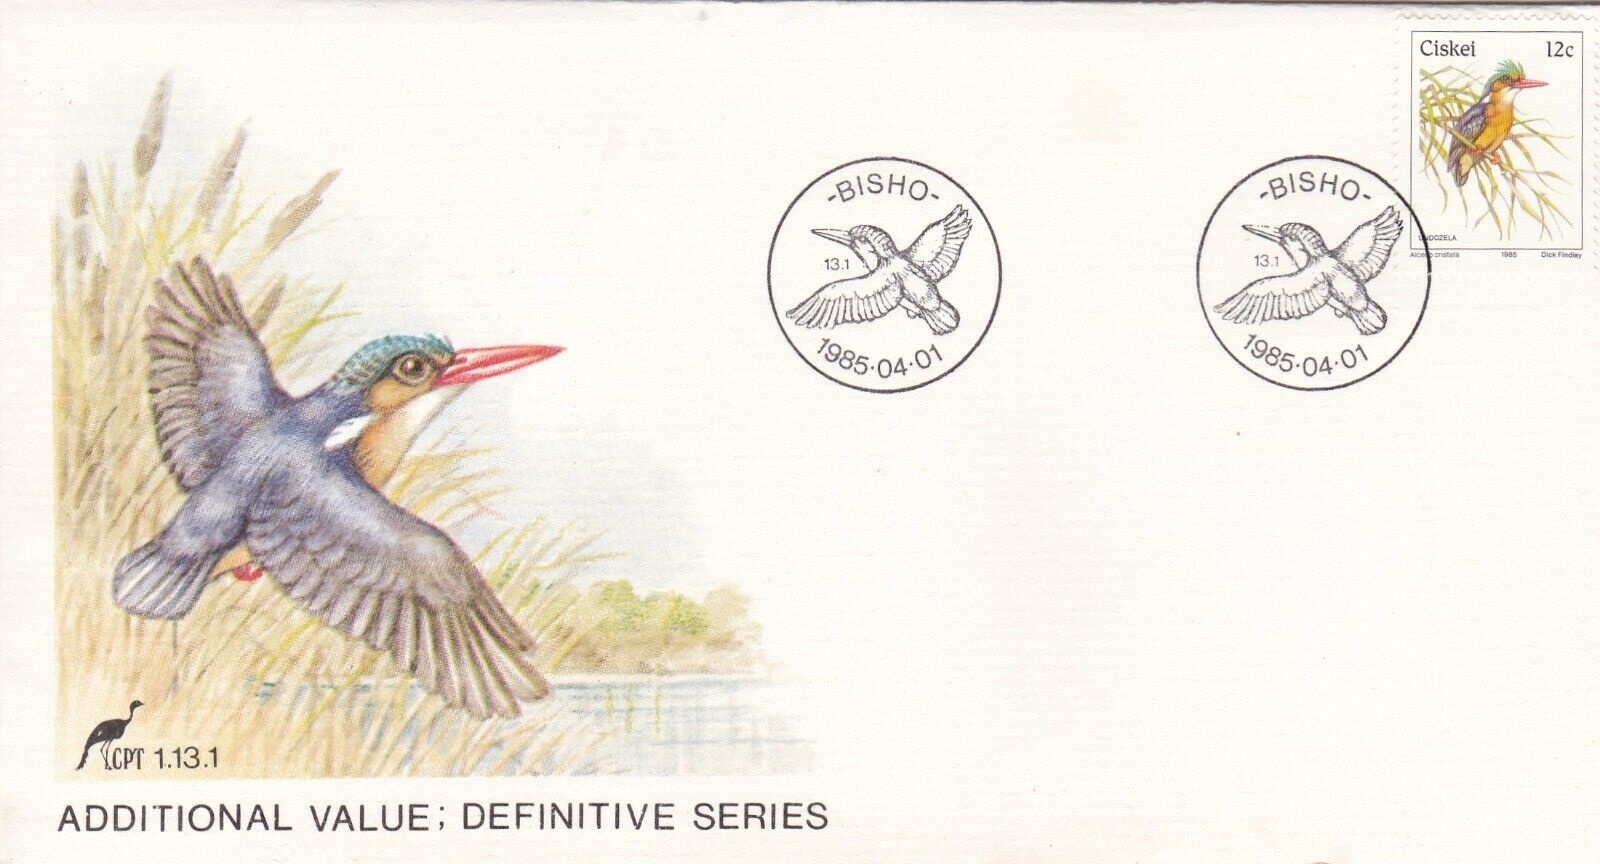 Ciskei 1985 Free Shipping New 16c additional definitive FDC U value latest enclosure with